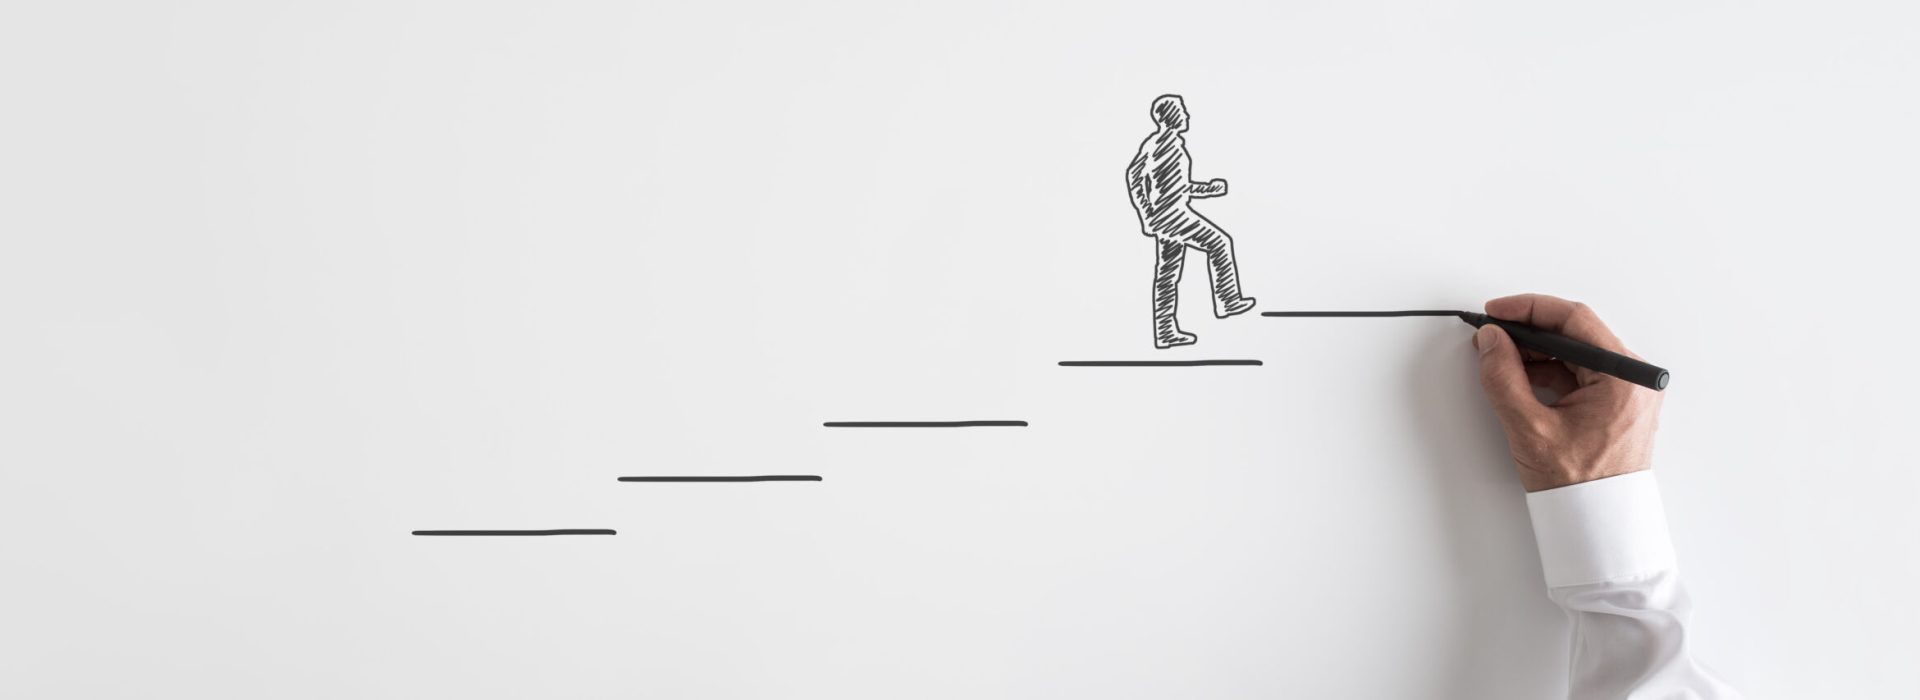 Wide view image of male hand drawing businessman walking up the stairs towards success over grey background.